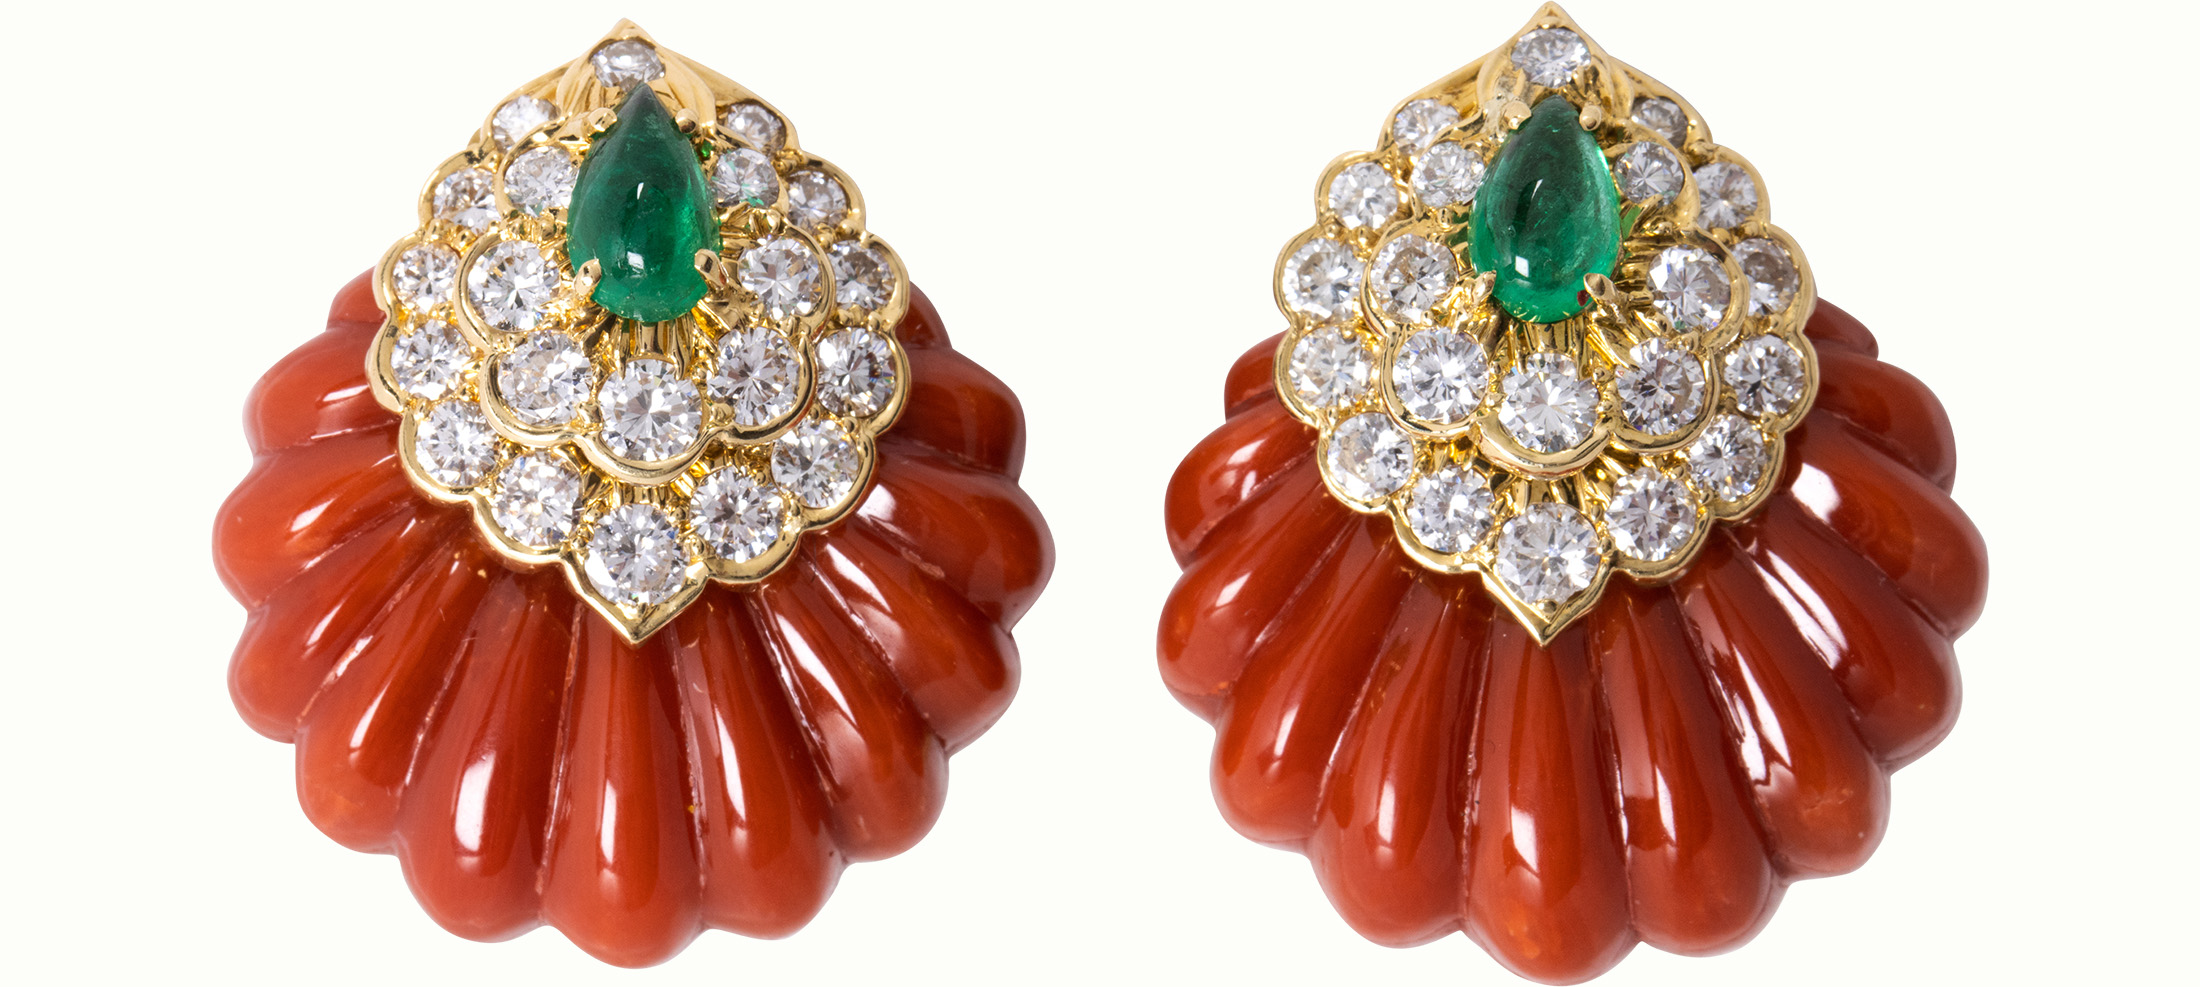 David Webb, a pair of coral, diamond, emerald and 18k gold ear clips.